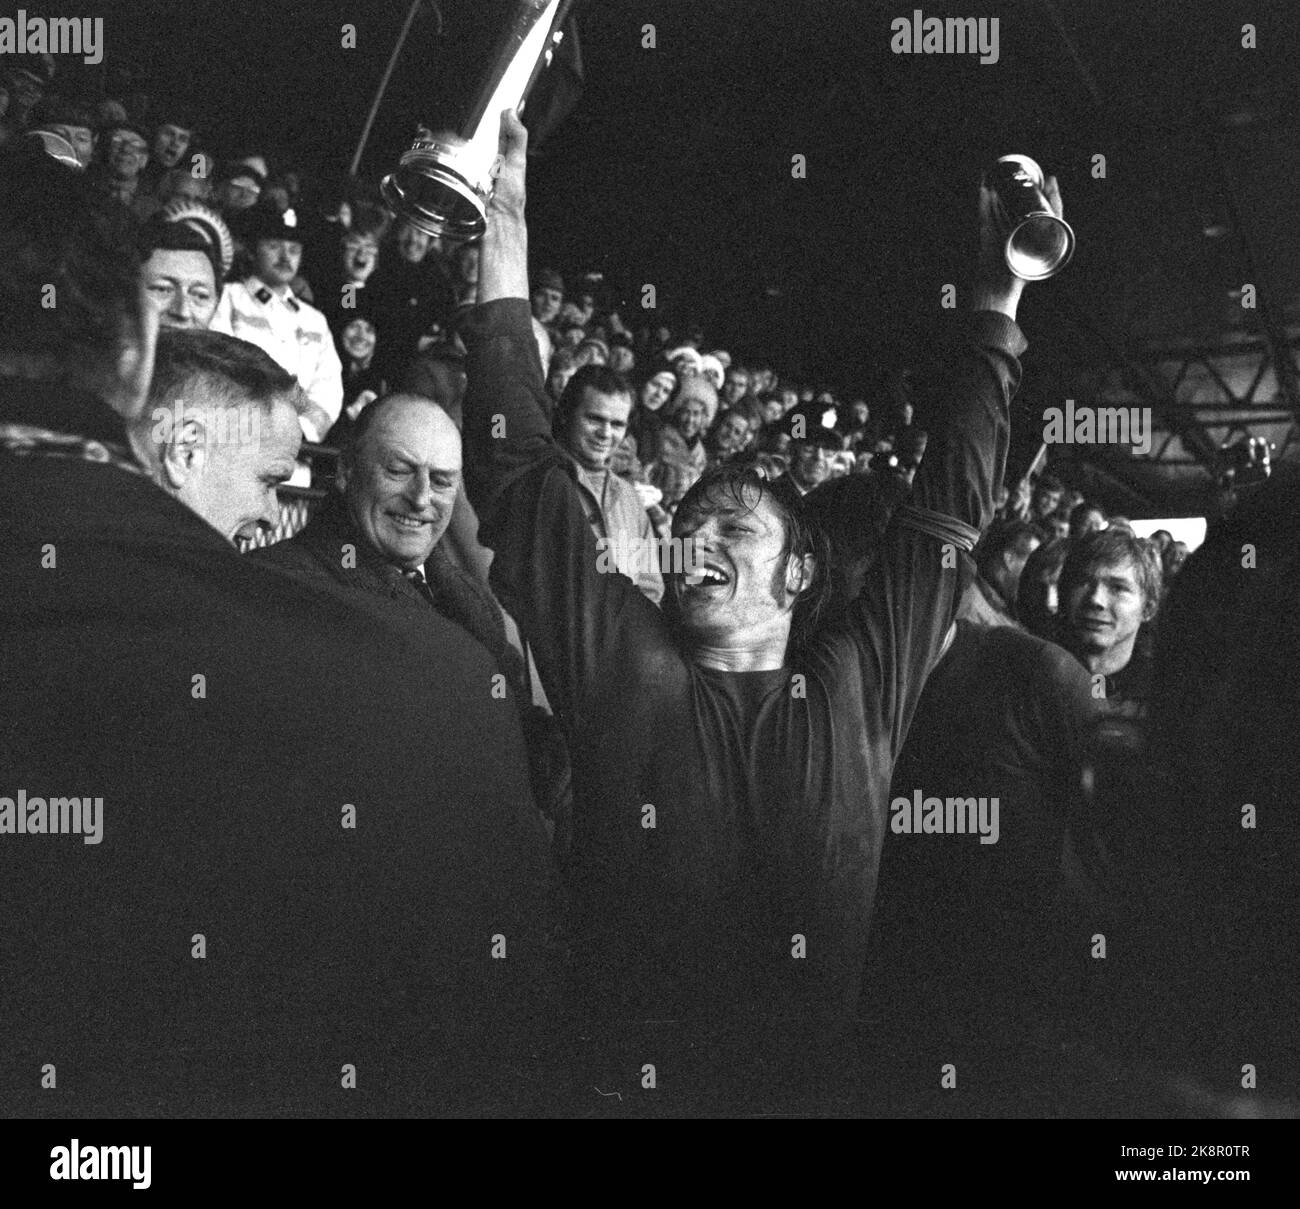 Oslo 19741020. Soccer. Cup final Skeid - Viking 3-1, Ullevaal Stadium. Skeid became Norwegian champions in the rain and sleet. Here, Skeid's team captain Tor Egil Johansen cheers with the royal trophy who he has just received from King Olav. T.v. For the King, Secretary General of the Norwegian Football Association NIC. Johansen. Photo NTB / NTB Stock Photo